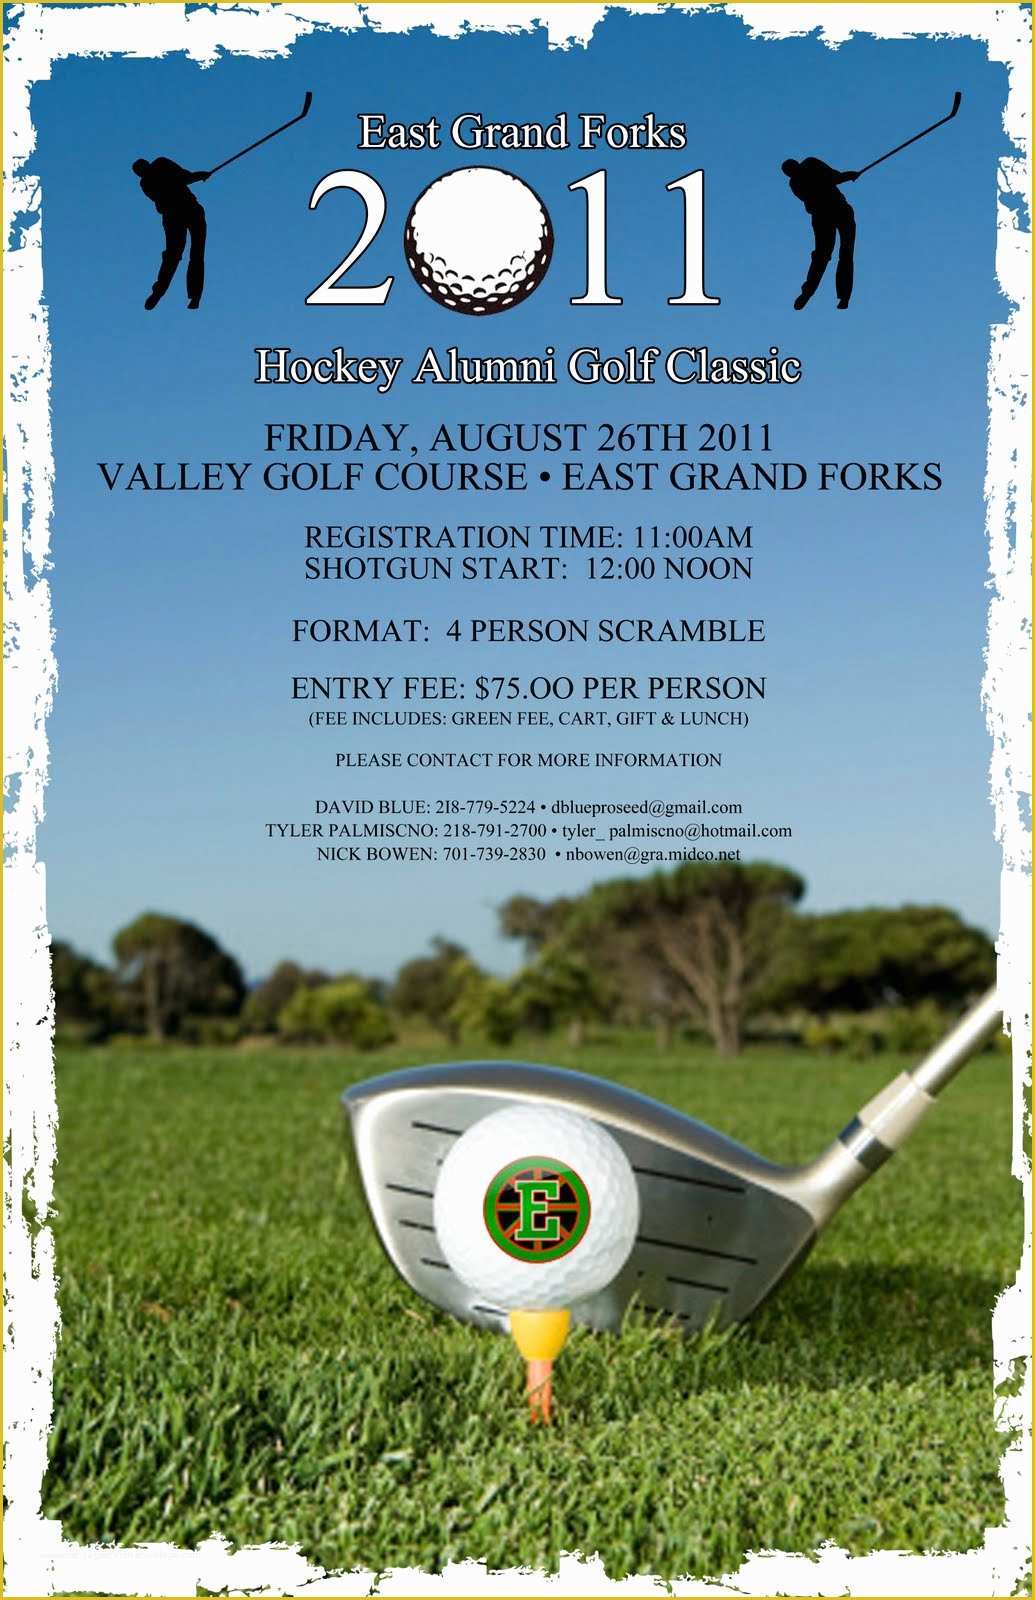 Free Golf Brochure Templates Of East Grand forks Greenwave Hockey Golf tournament